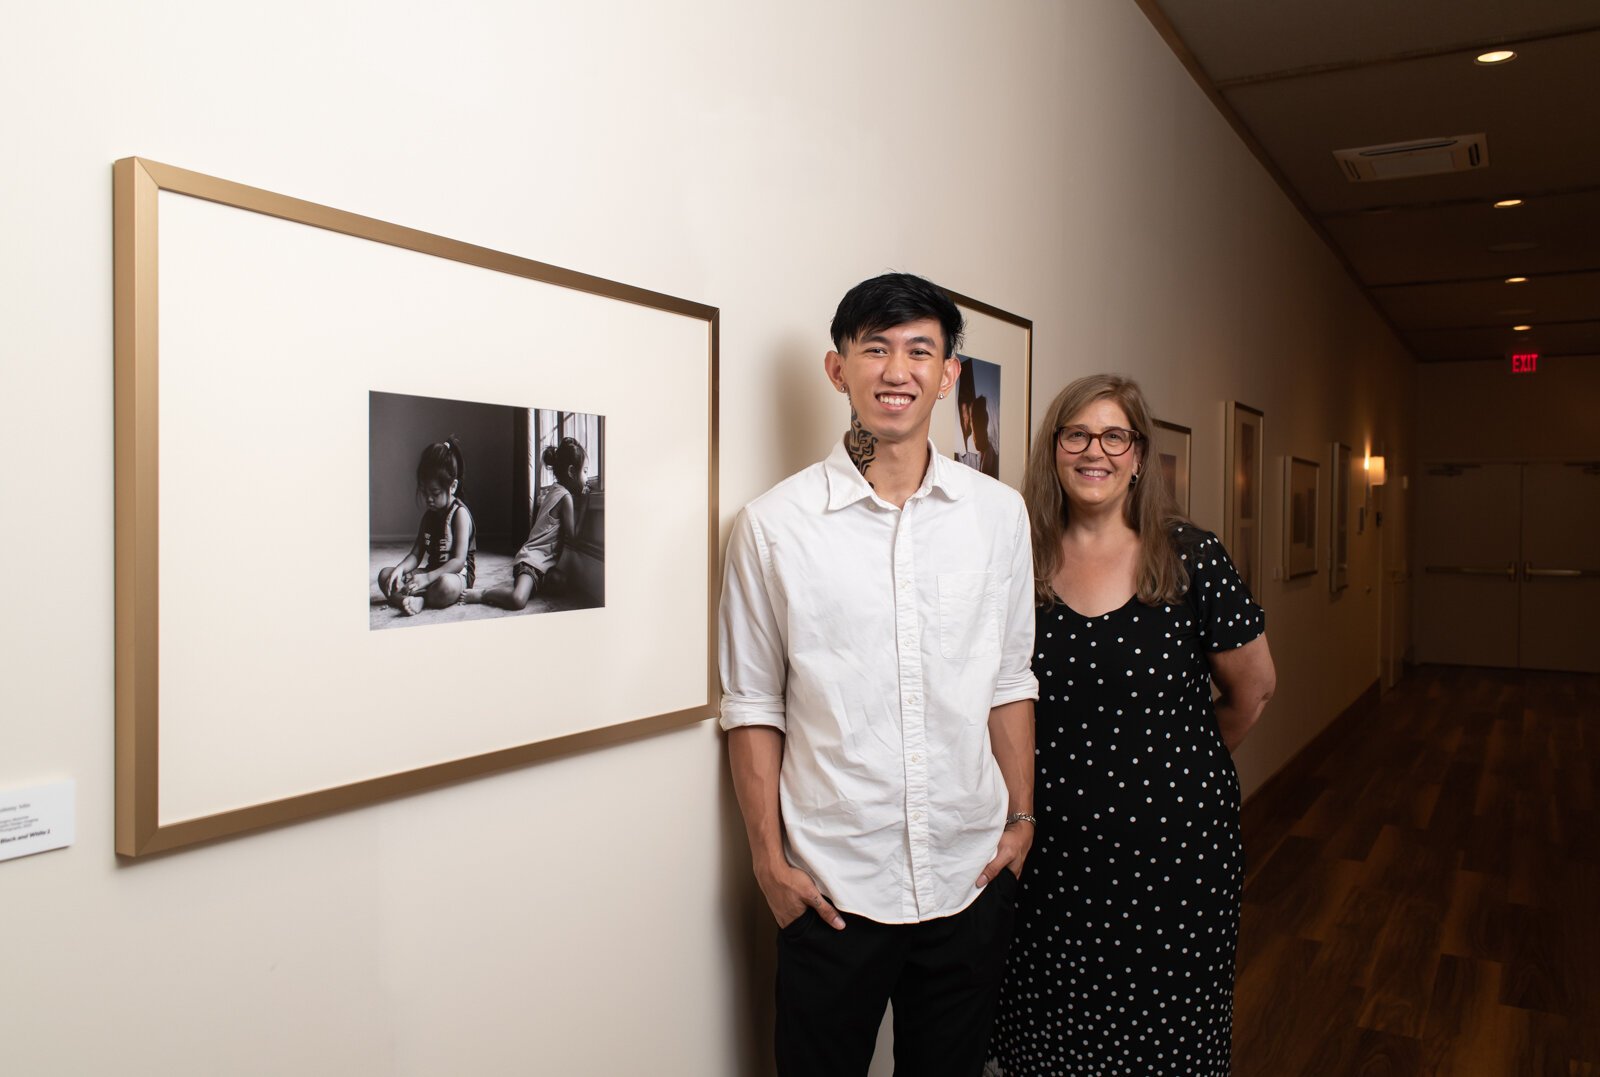 PFW Professor Rebecca Coffman and recent PFW graduate and artist Johnny Min in the new revolving gallery featuring work from Purdue Fort Wayne students, alumni and faculty at The Bradley, 204 W. Main St.